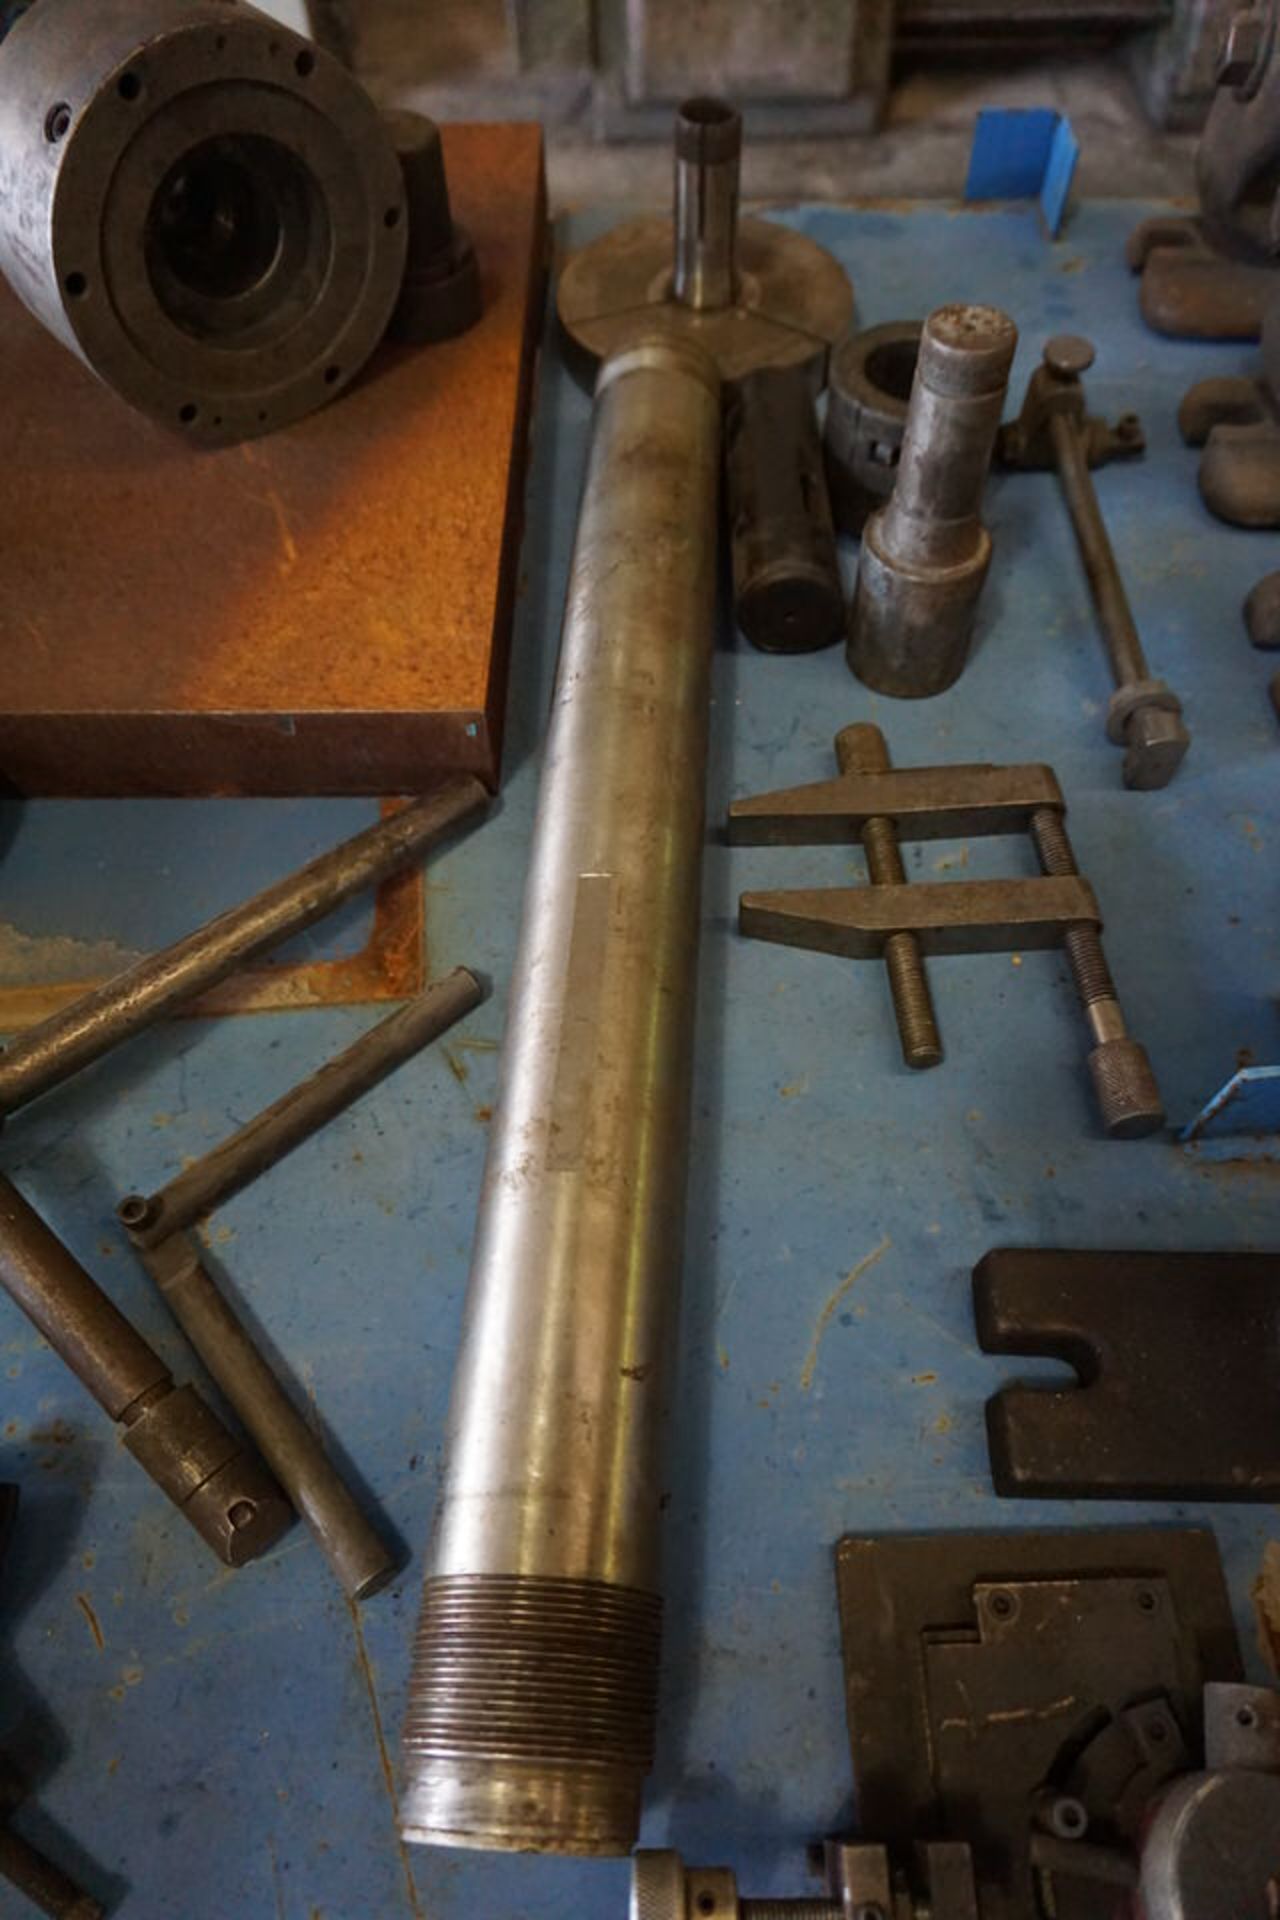 STEEL TABLE W/ CONT: TAILSTOCK, FOLLOW REST,BORING HEAD, MISC AS SHOWN - Image 7 of 8